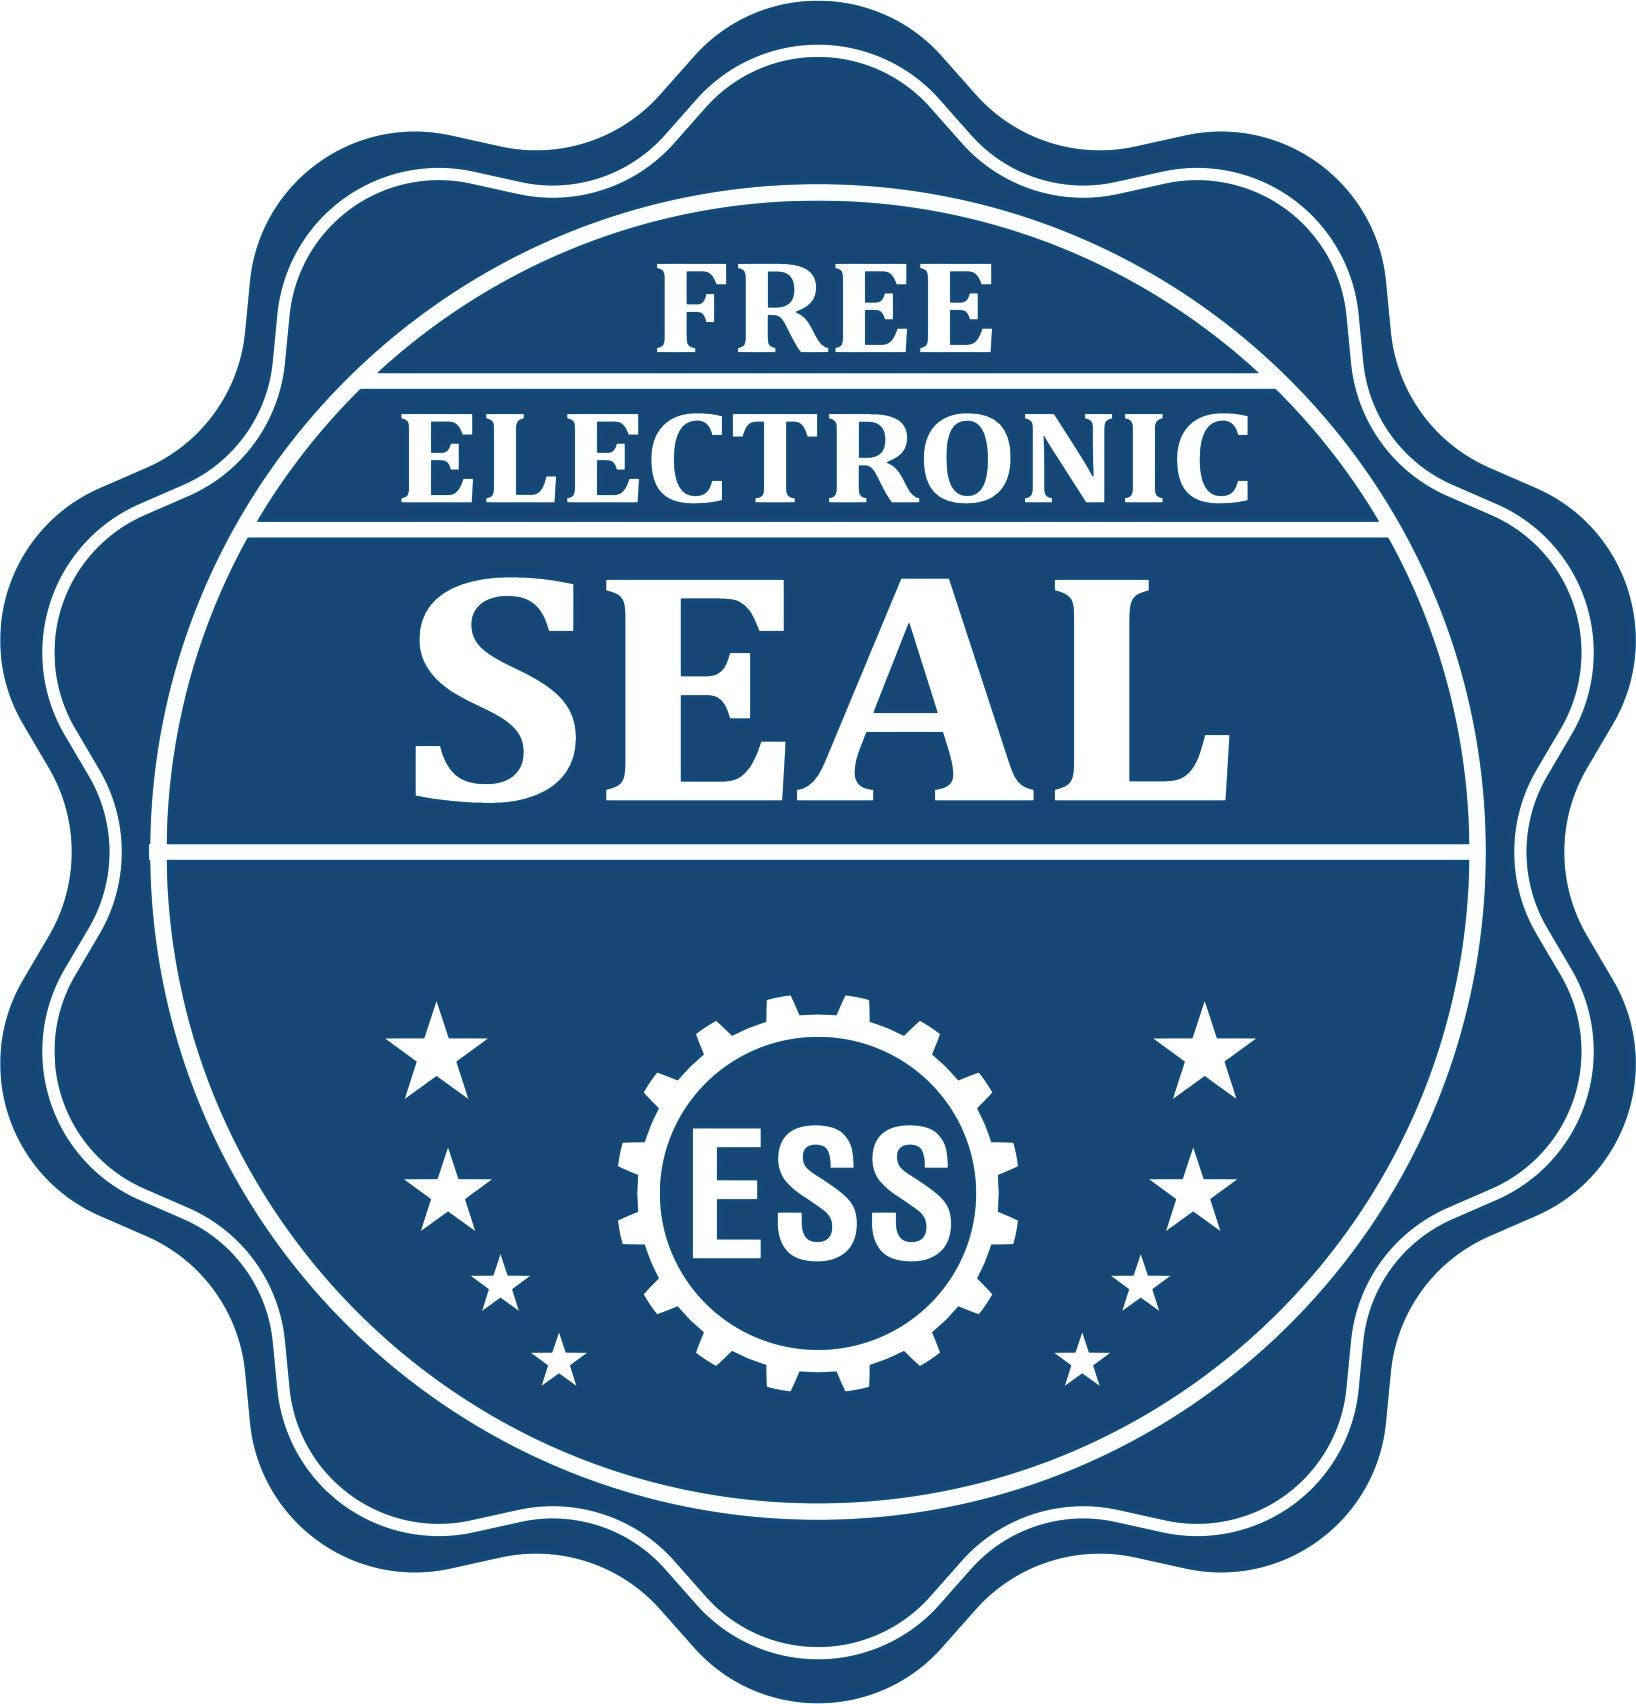 A badge showing a free electronic seal for the Hybrid Delaware Engineer Seal with stars and the ESS gear on the emblem.